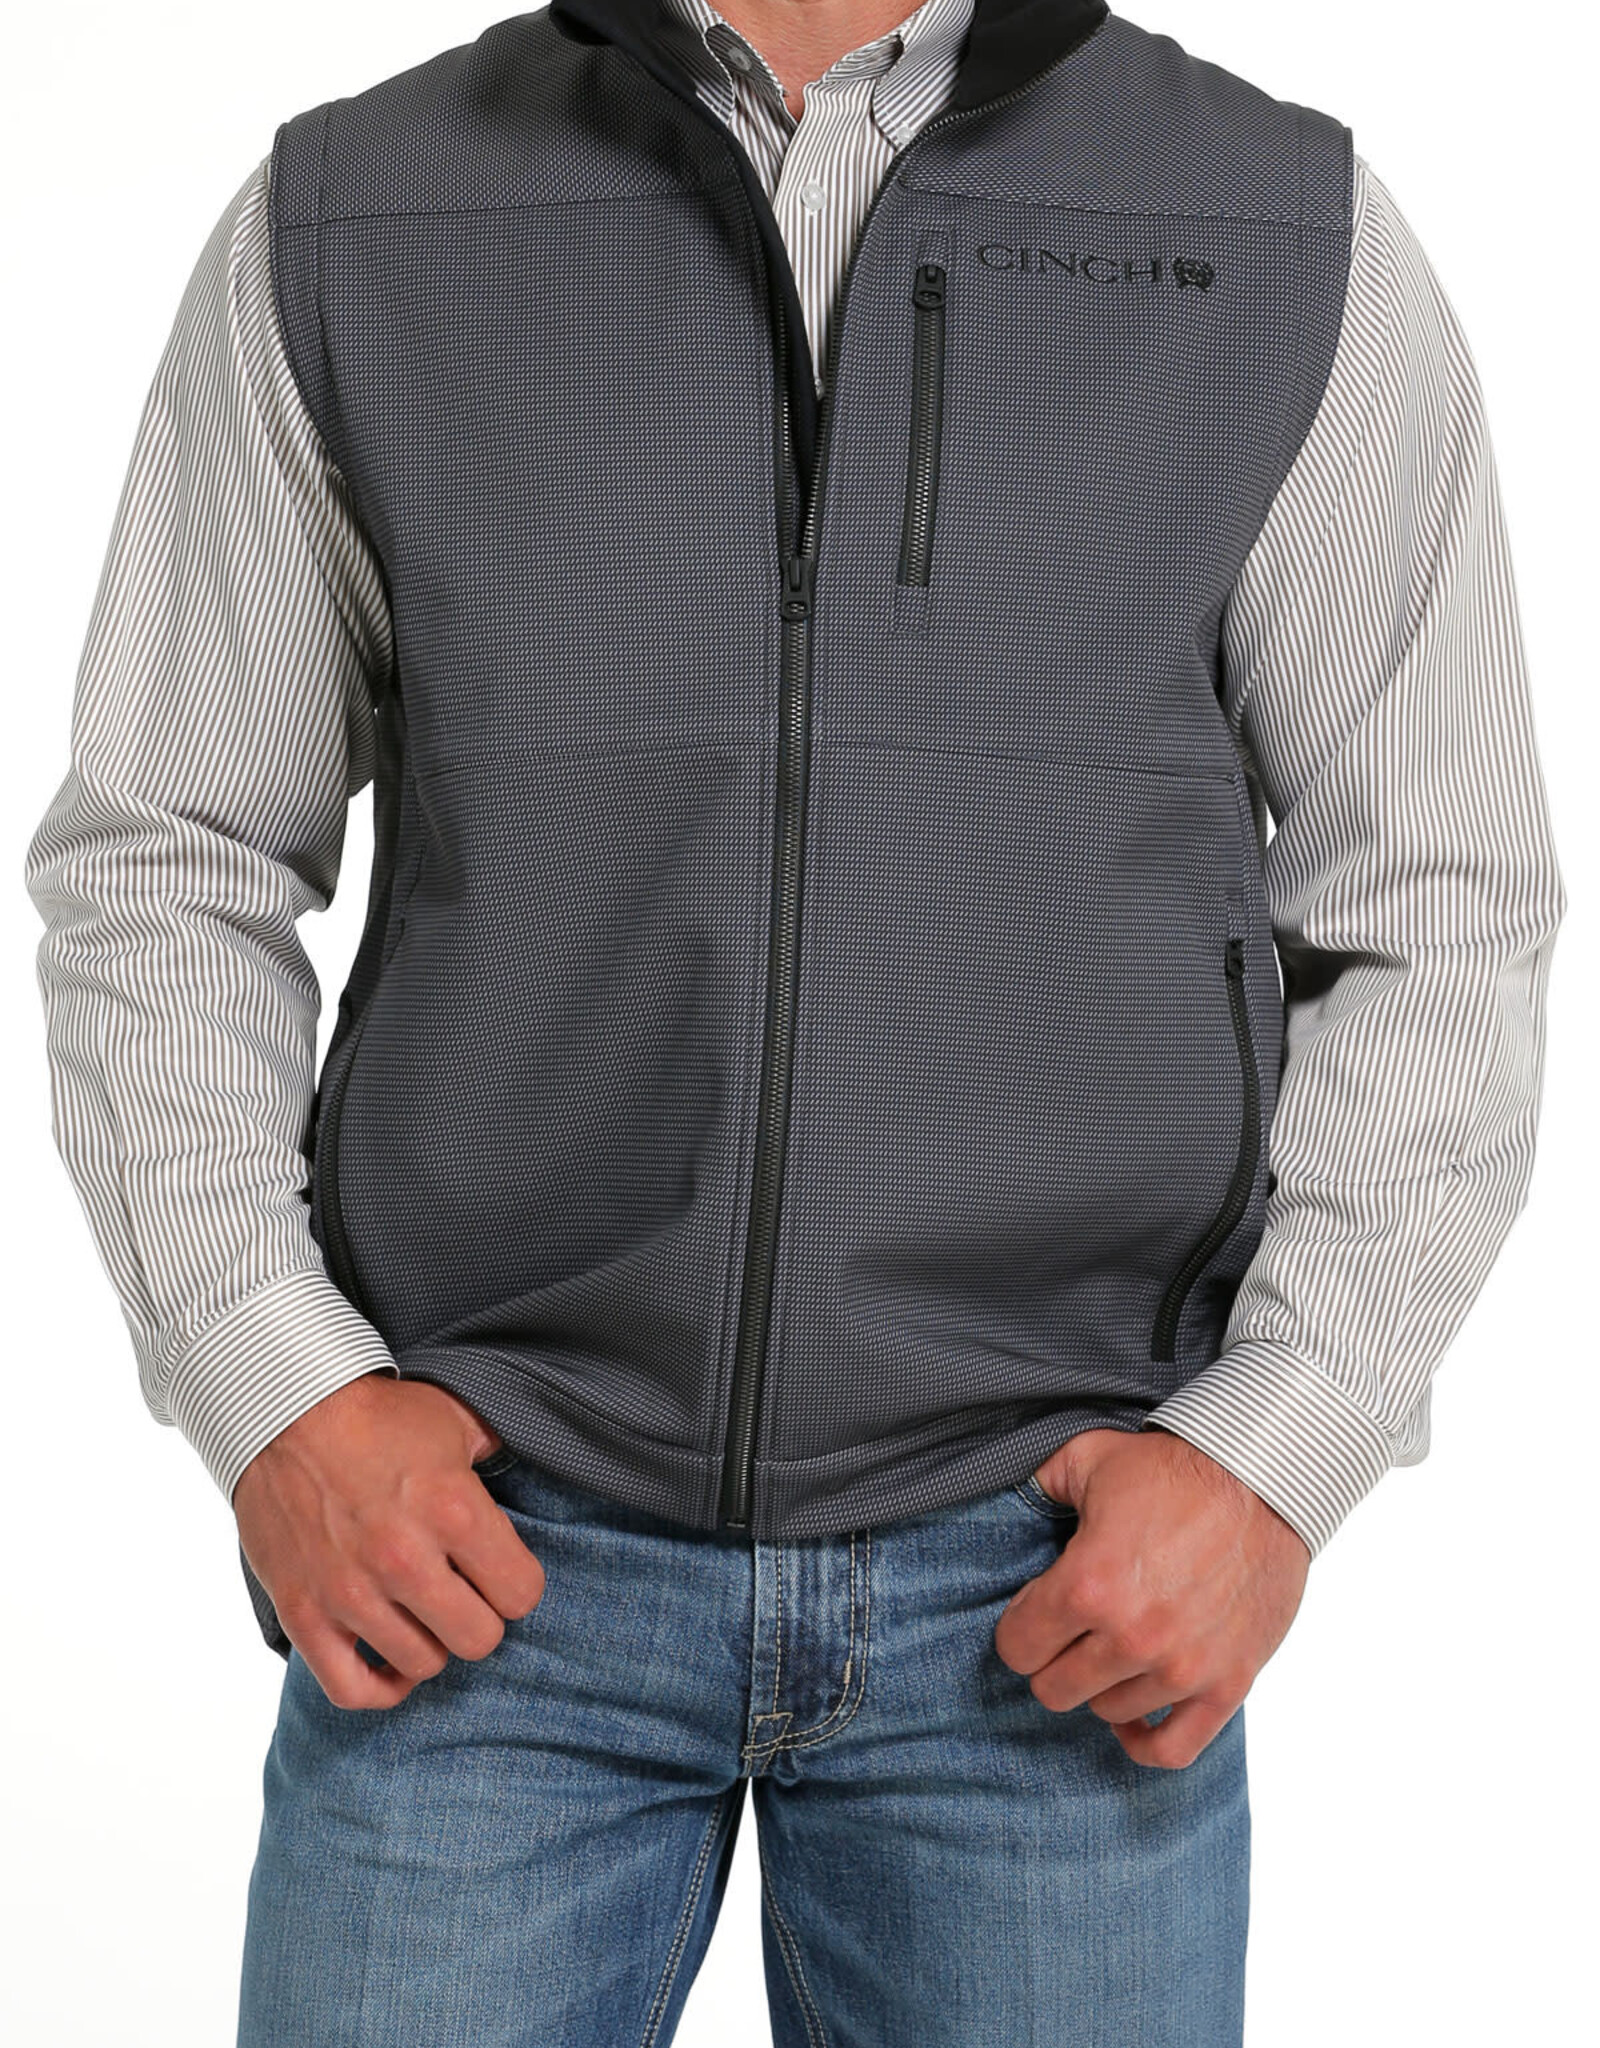 Stretch microfiber vest with embroidered logo (charcoal)